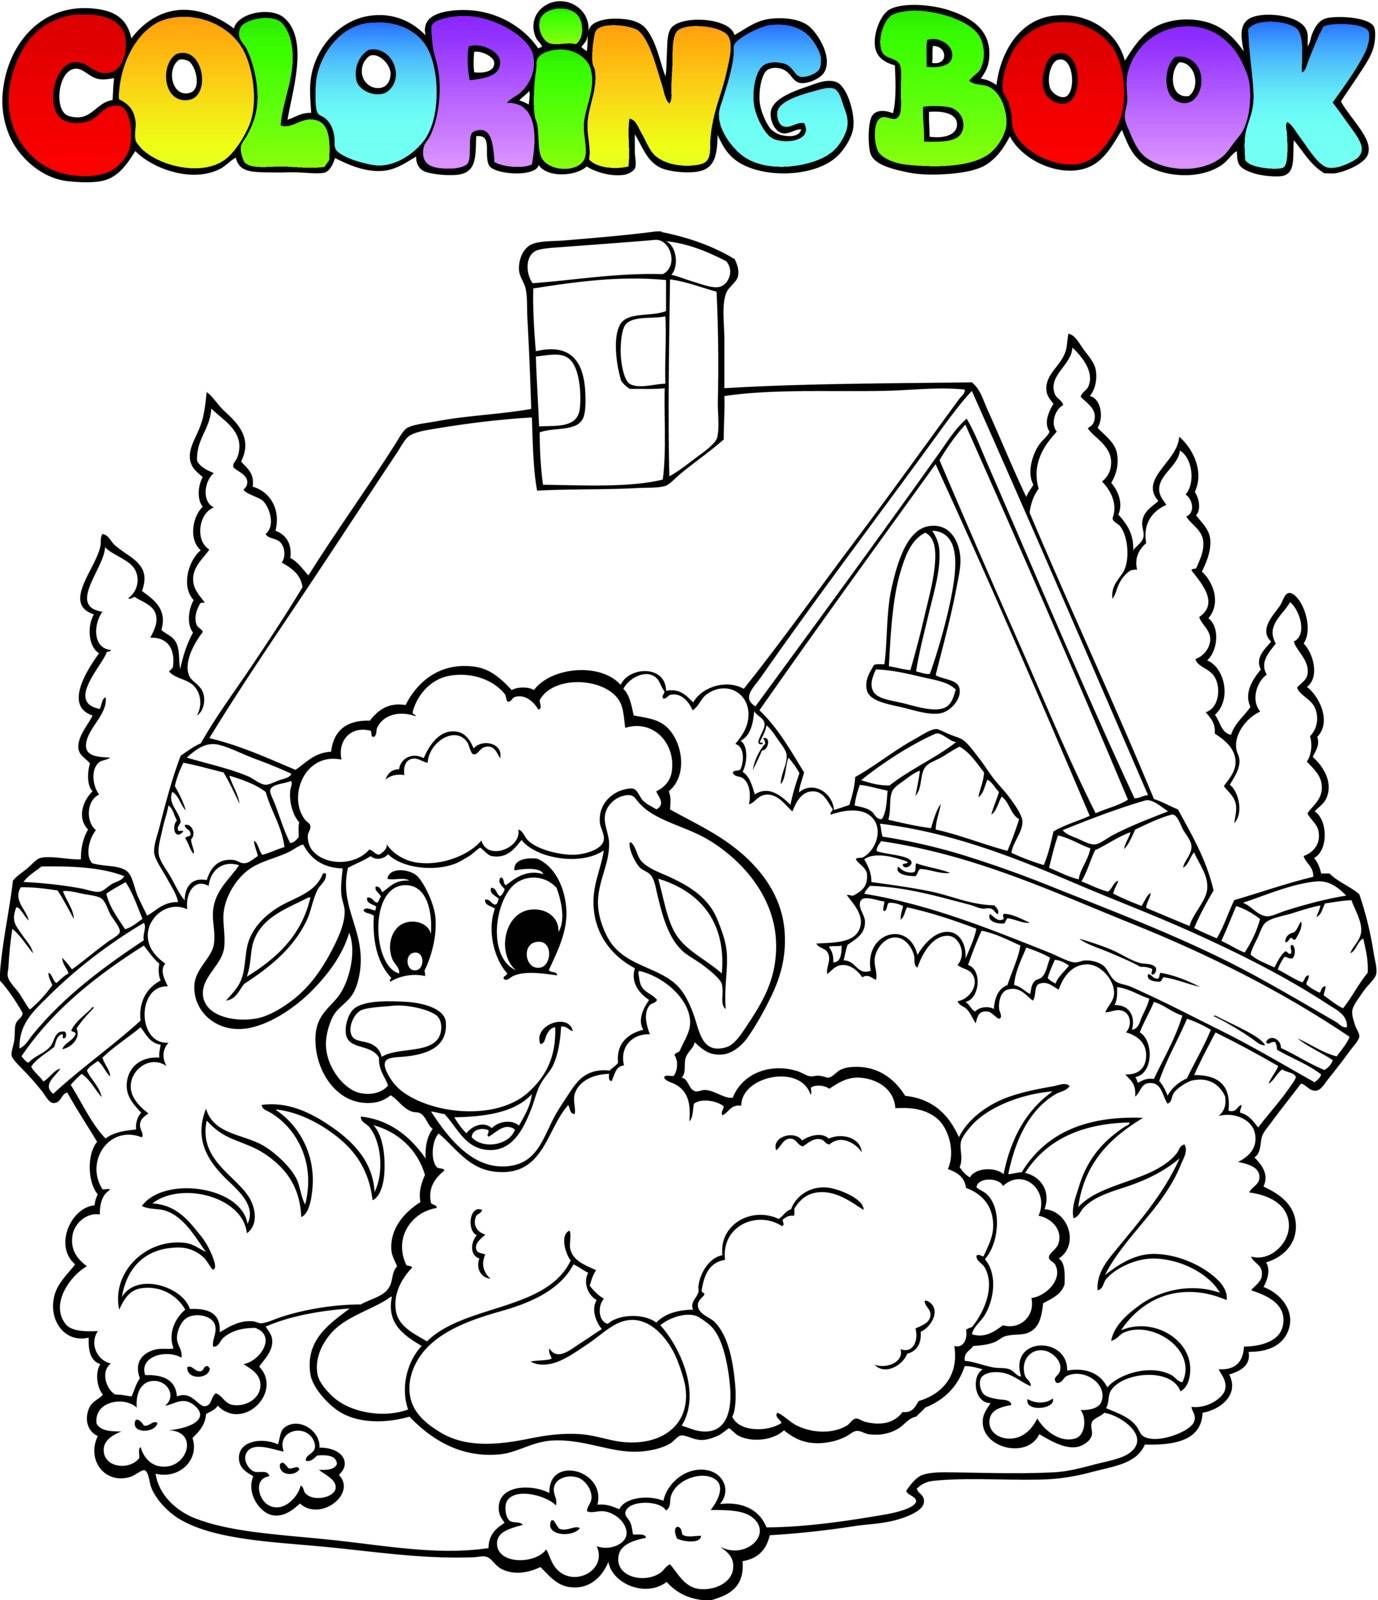 Coloring book spring theme 1 by clairev